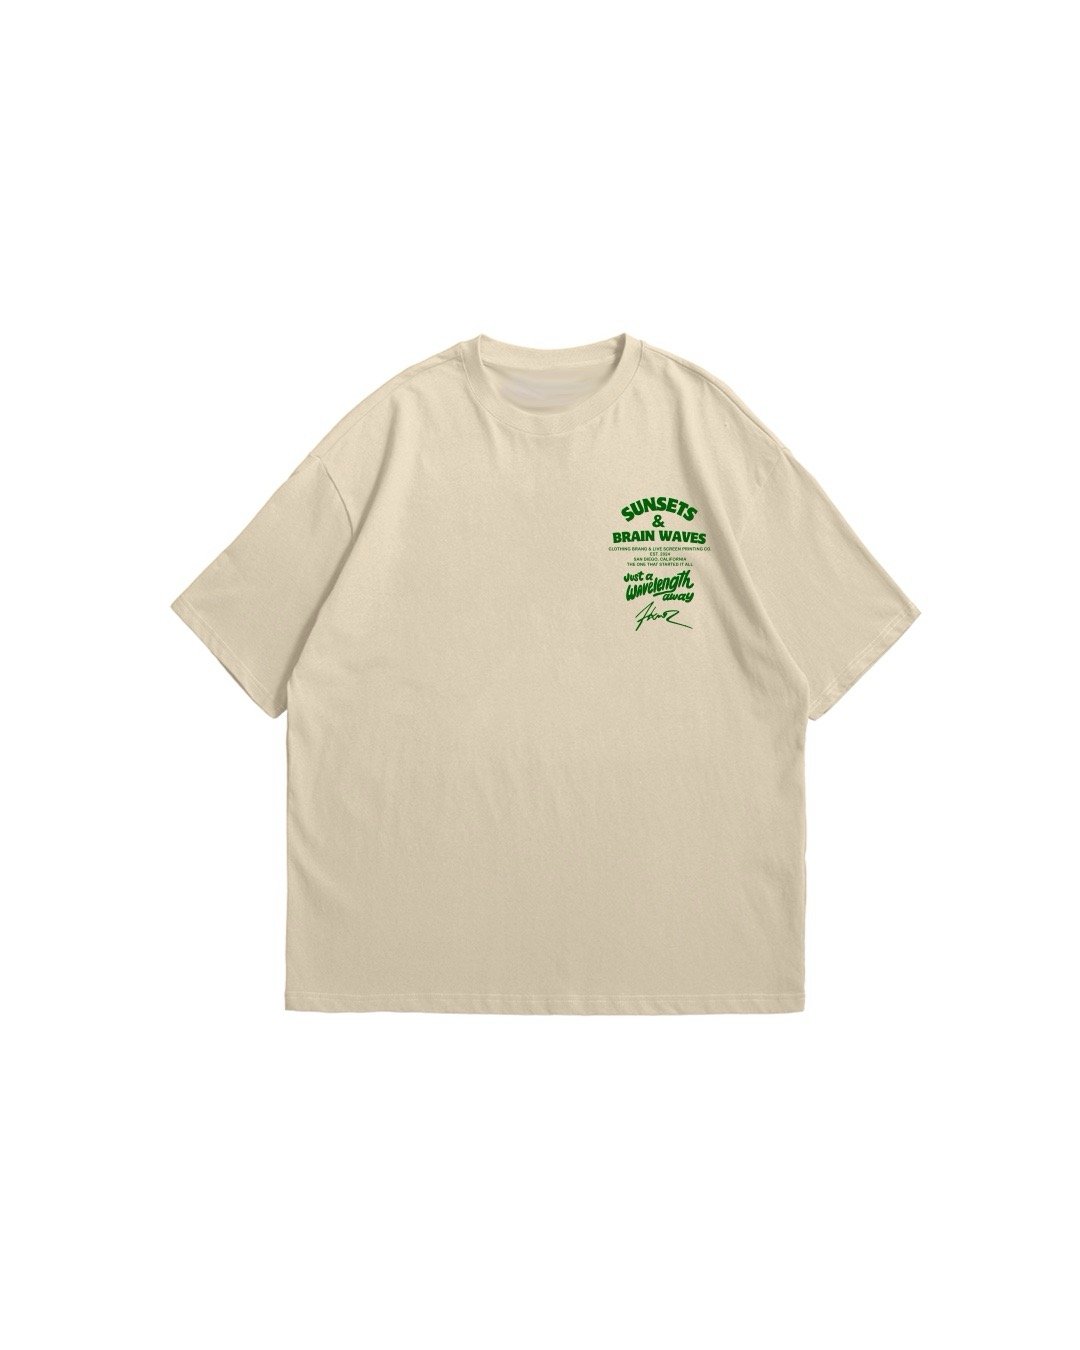 Image of One Year Anniversary Shop Tee